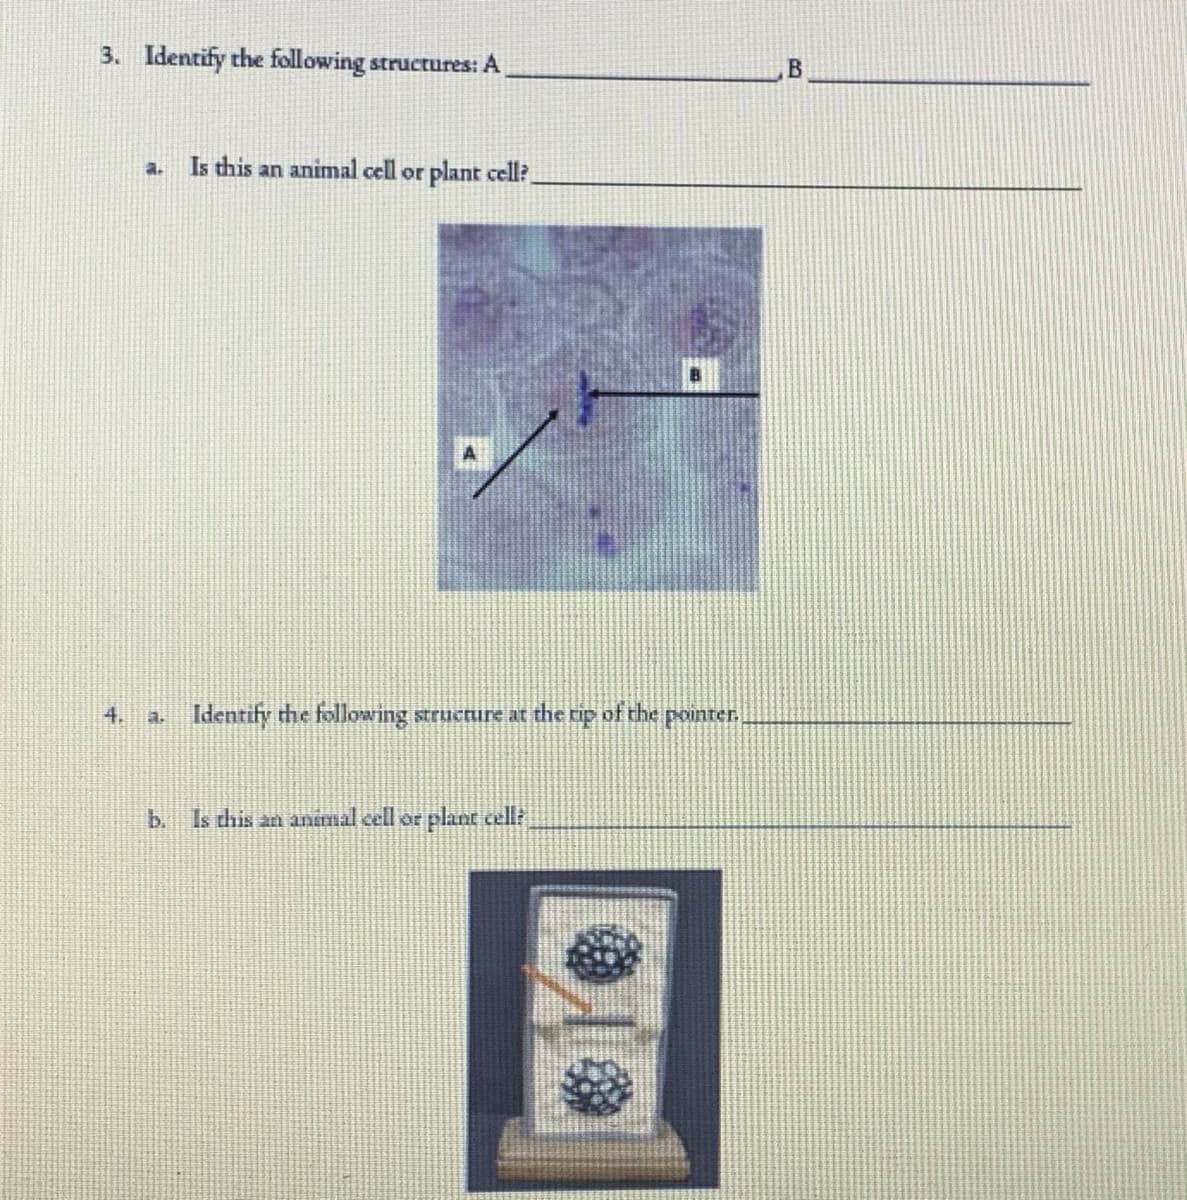 3. Identify the following structures: A
Is this an animal cell or plant cell?
a.
4.
a. Identify the following structure at the rip of the pointer.
b. Is this an animal cell or plant cell:
